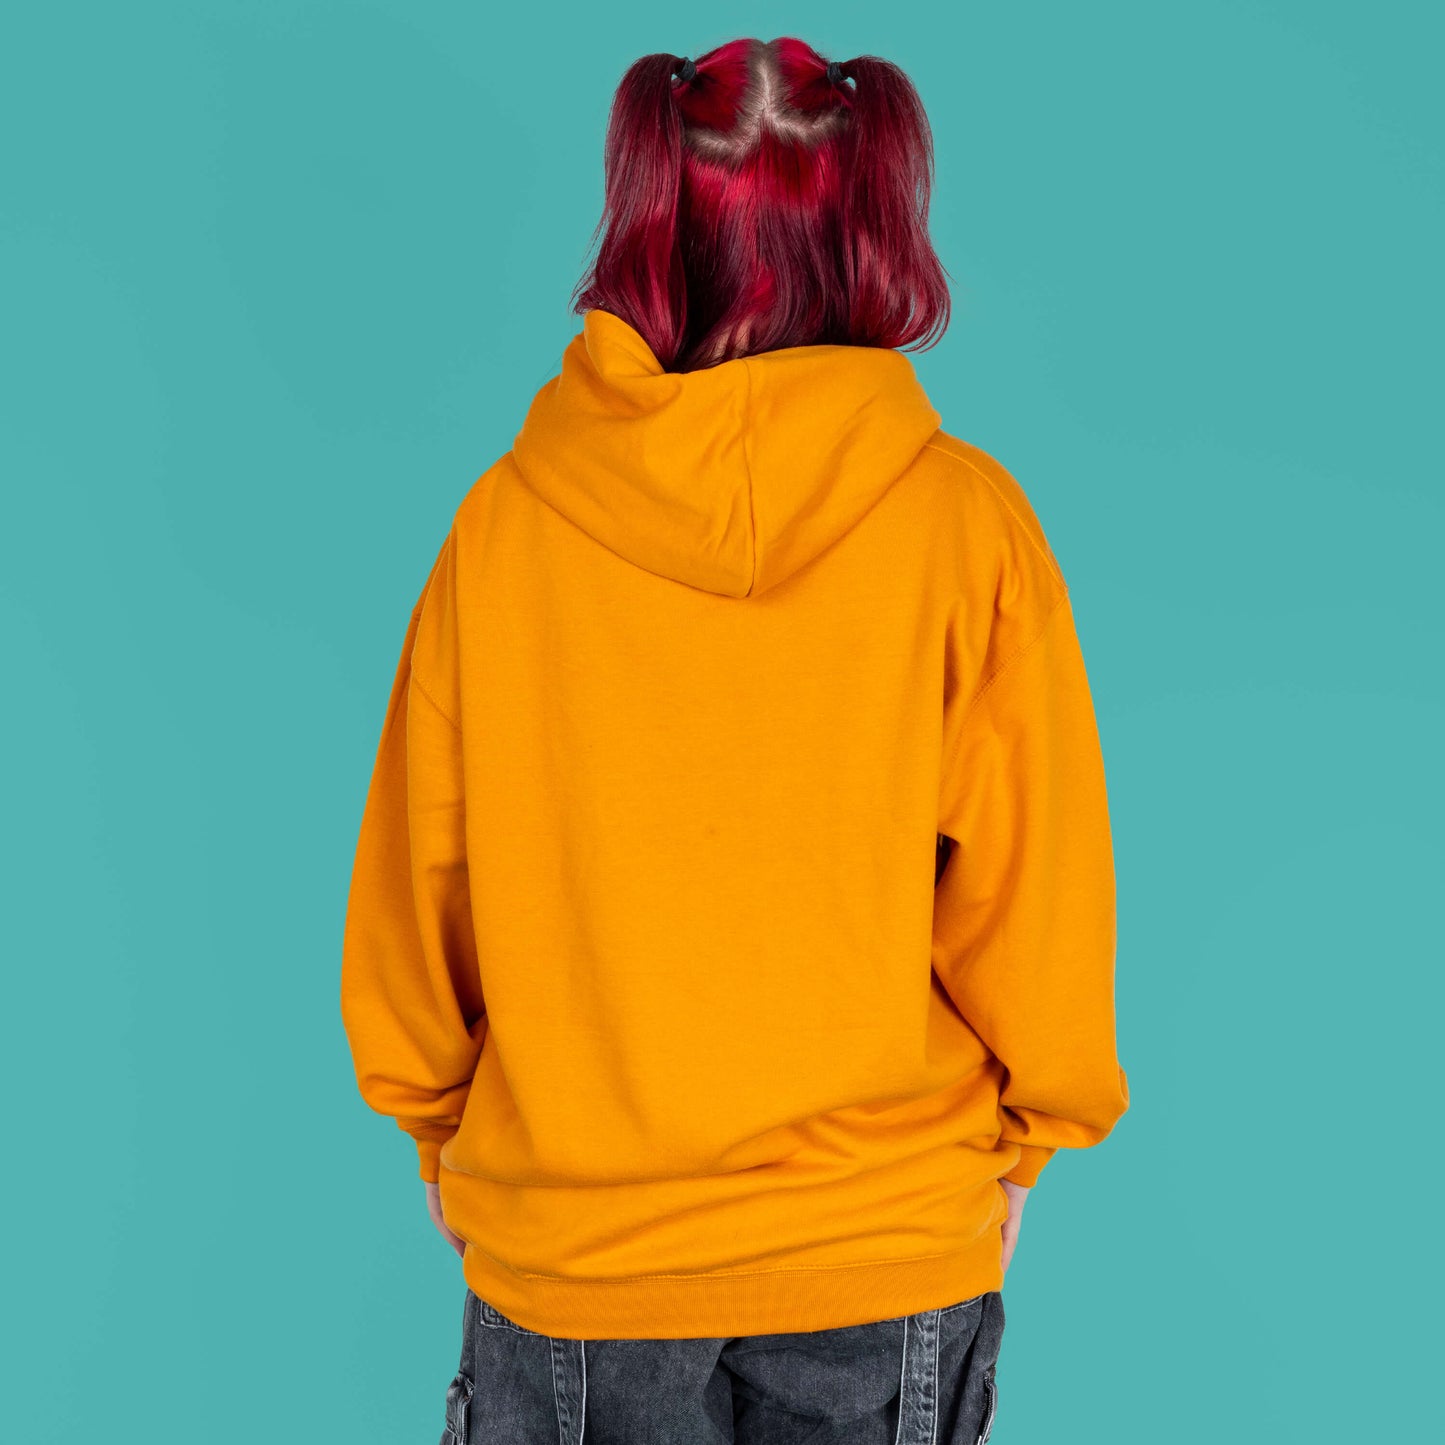 The Chronic Over Sharer Pumpkin Orange Hoodie modelled on Flo, a red haired alternative model, in front of a blue background. She is facing away from camera to highlight the plain orange back. The design was created to raise awareness for neurodivergent disorders such as ADHD.